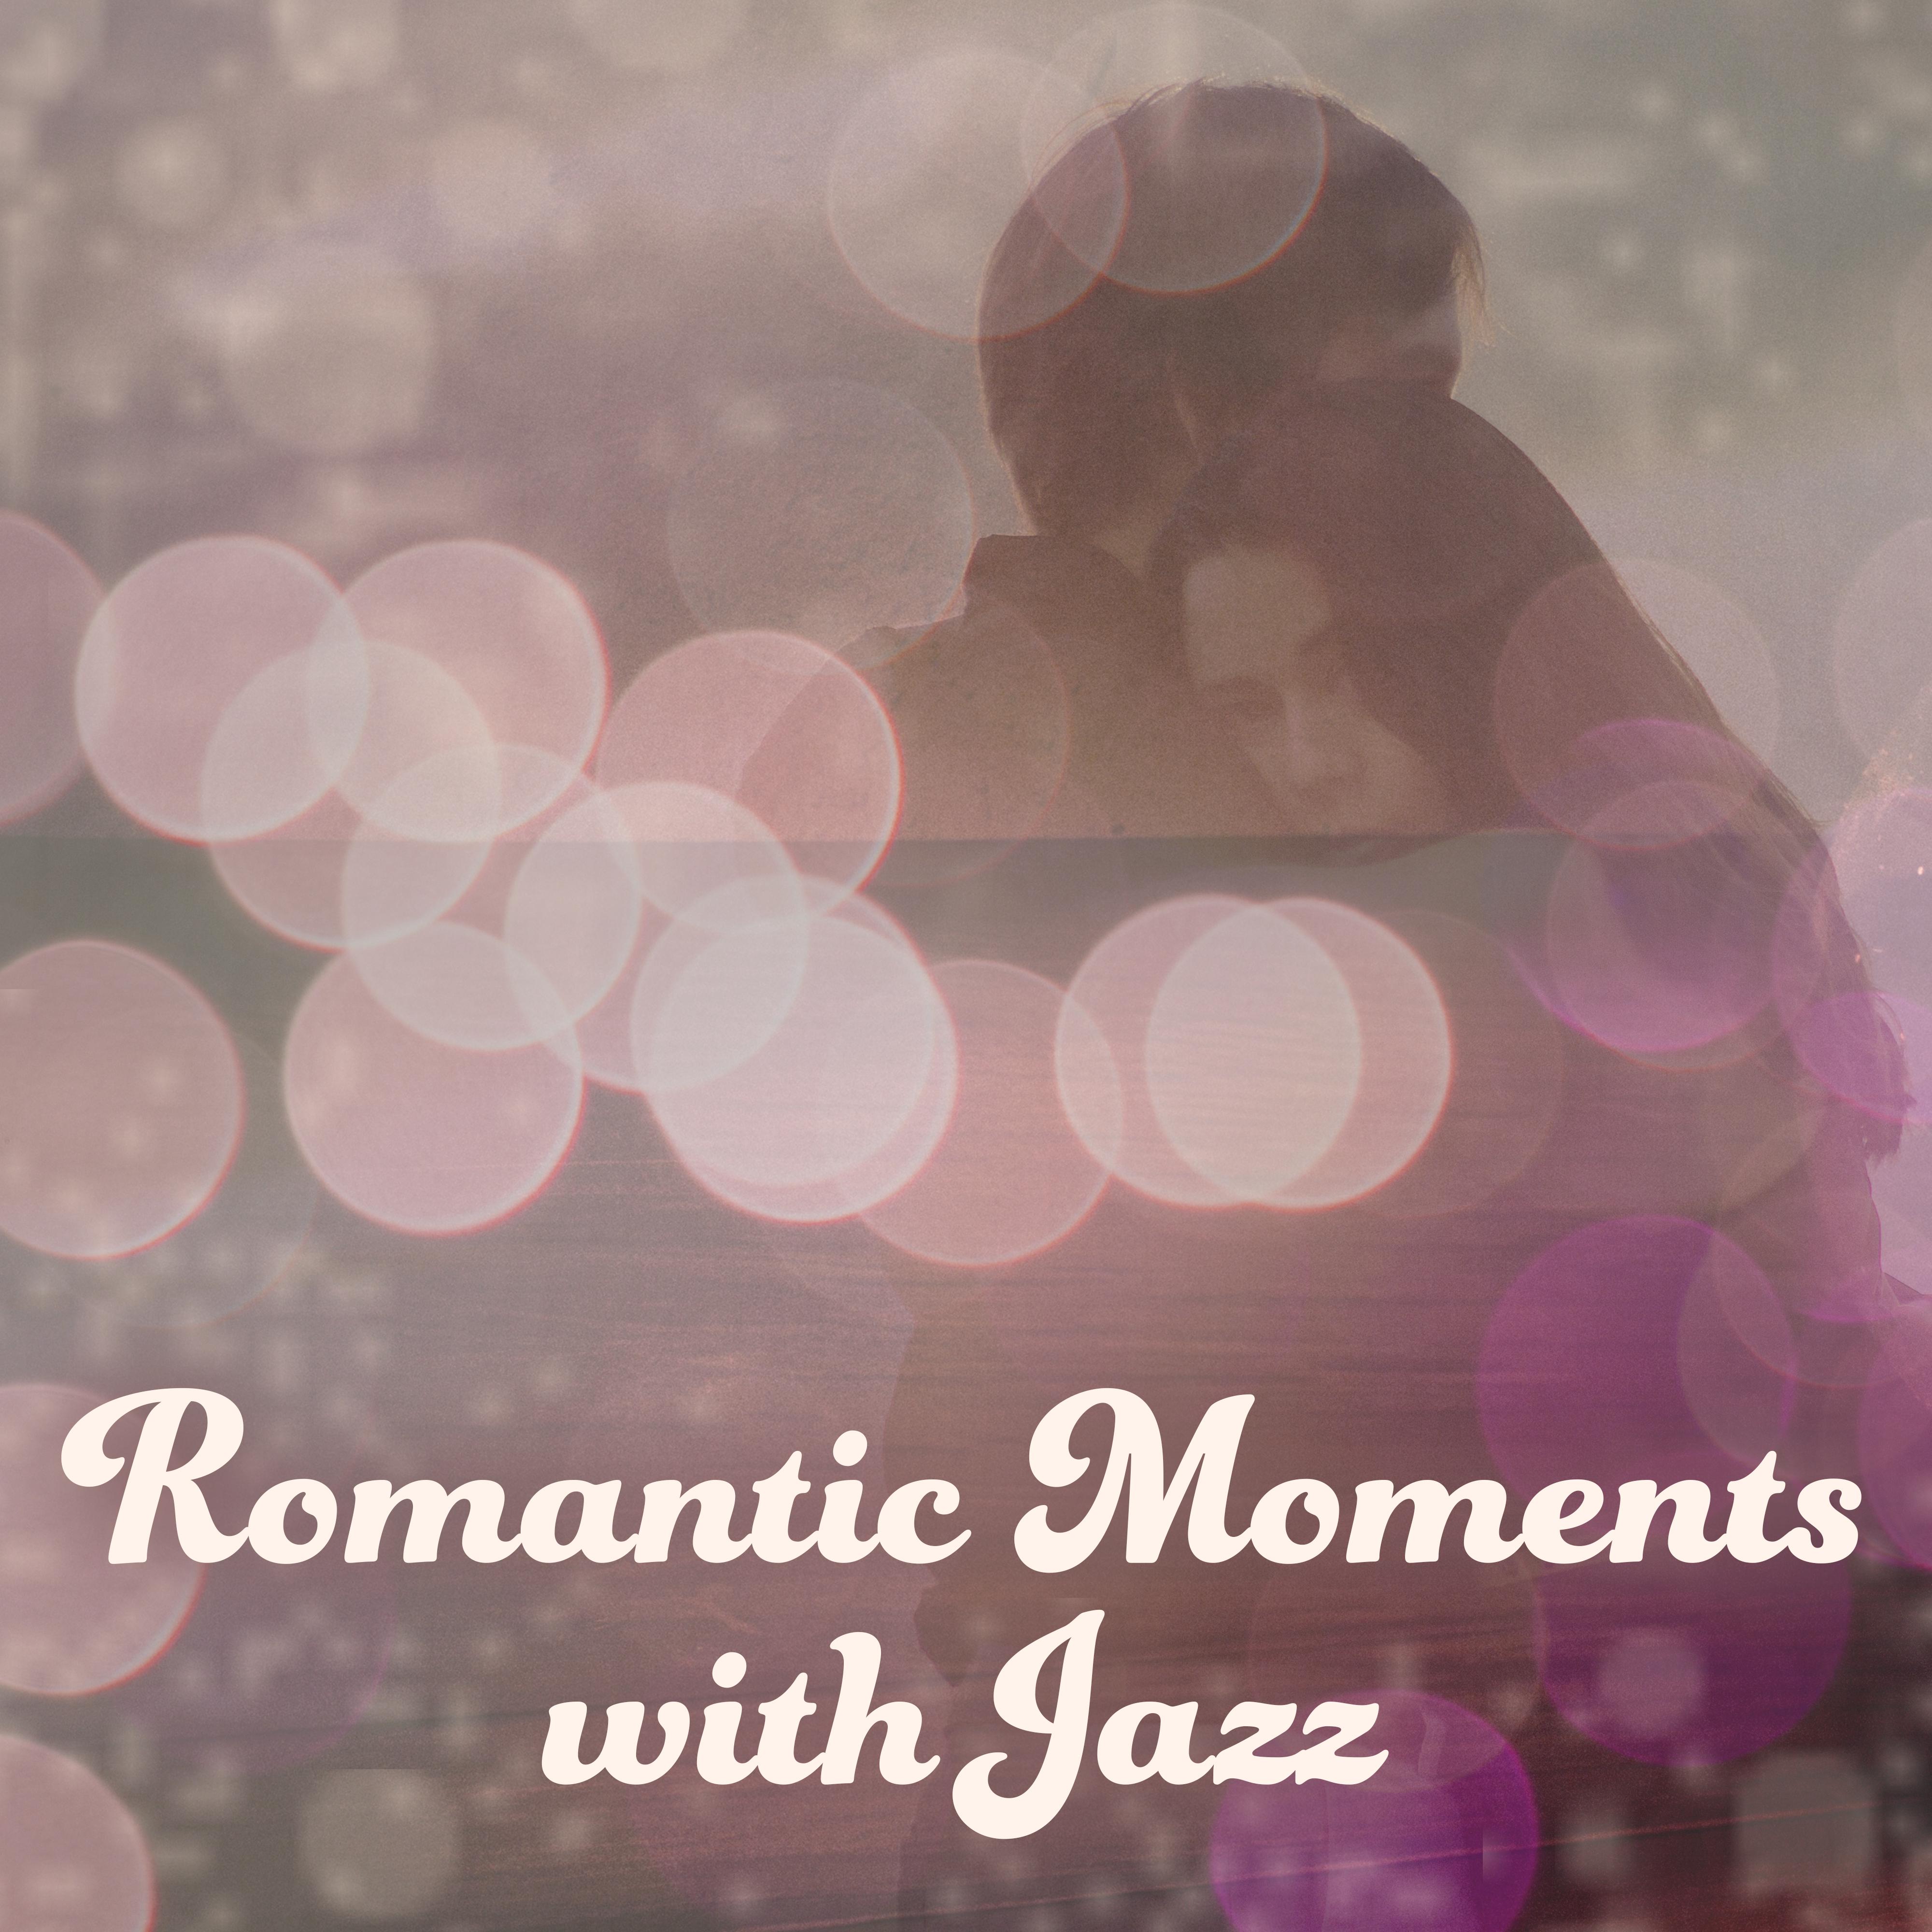 Romantic Moments with Jazz – Instrumental Music, Romantic Jazz, Easy Listening, Music for Dinner, Simple Piano